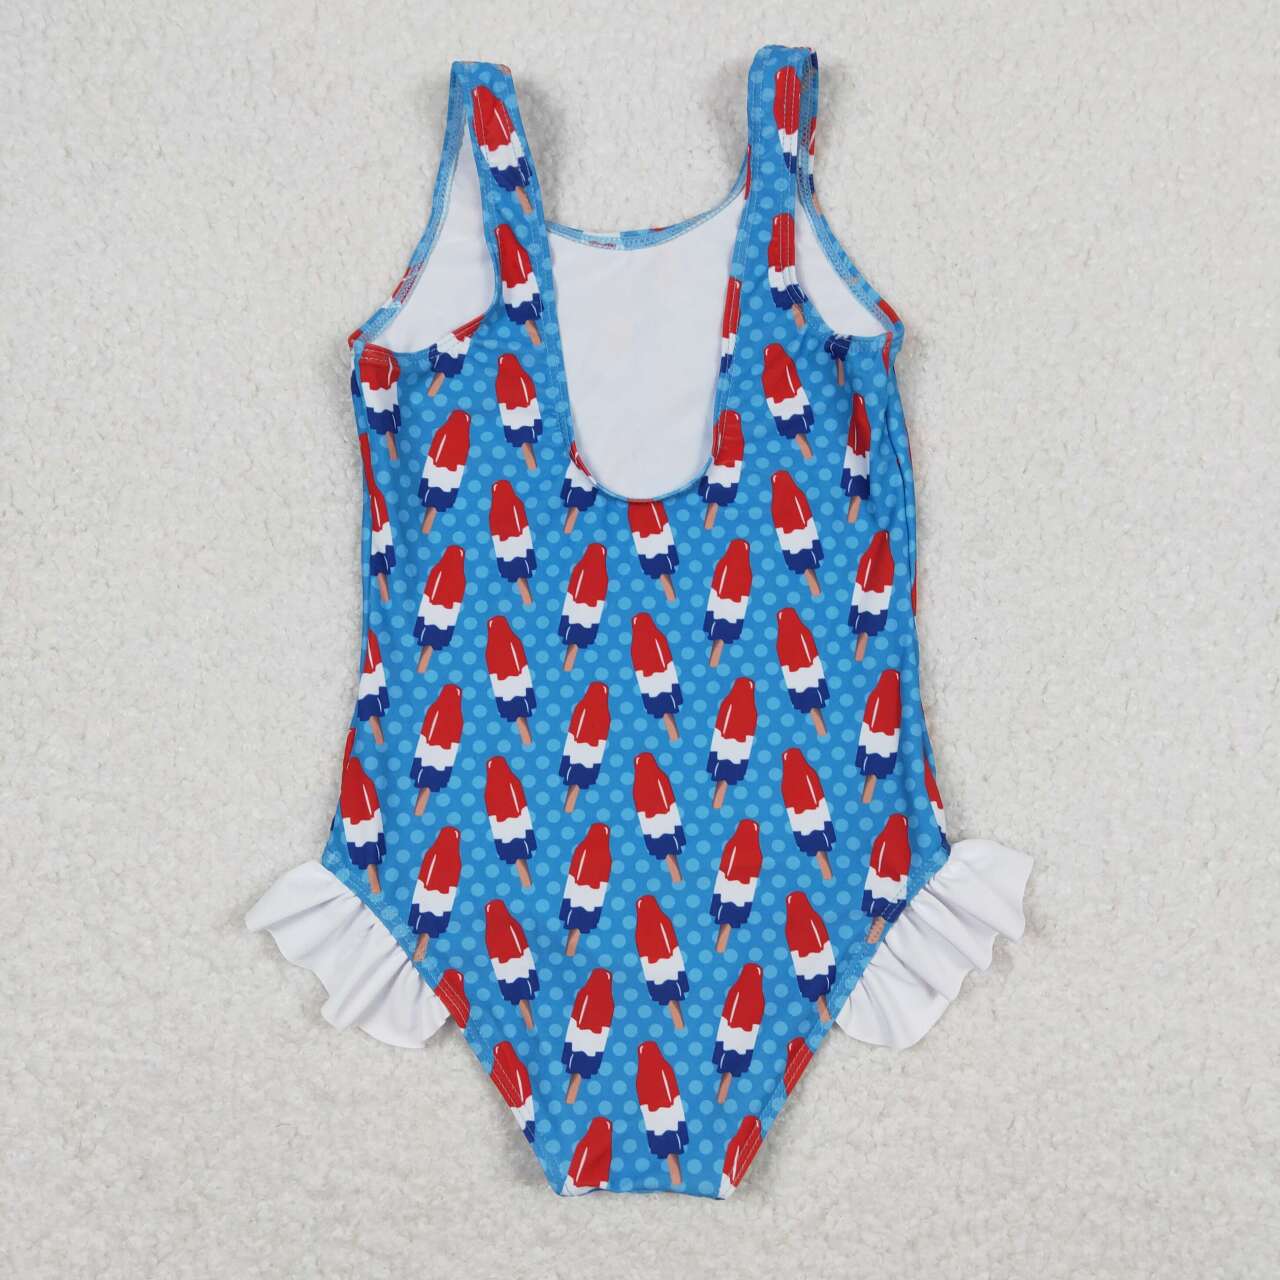 S0217 Popsicle Blue Polka Dots Print 1 Piece Girls 4th of July Swimsuits